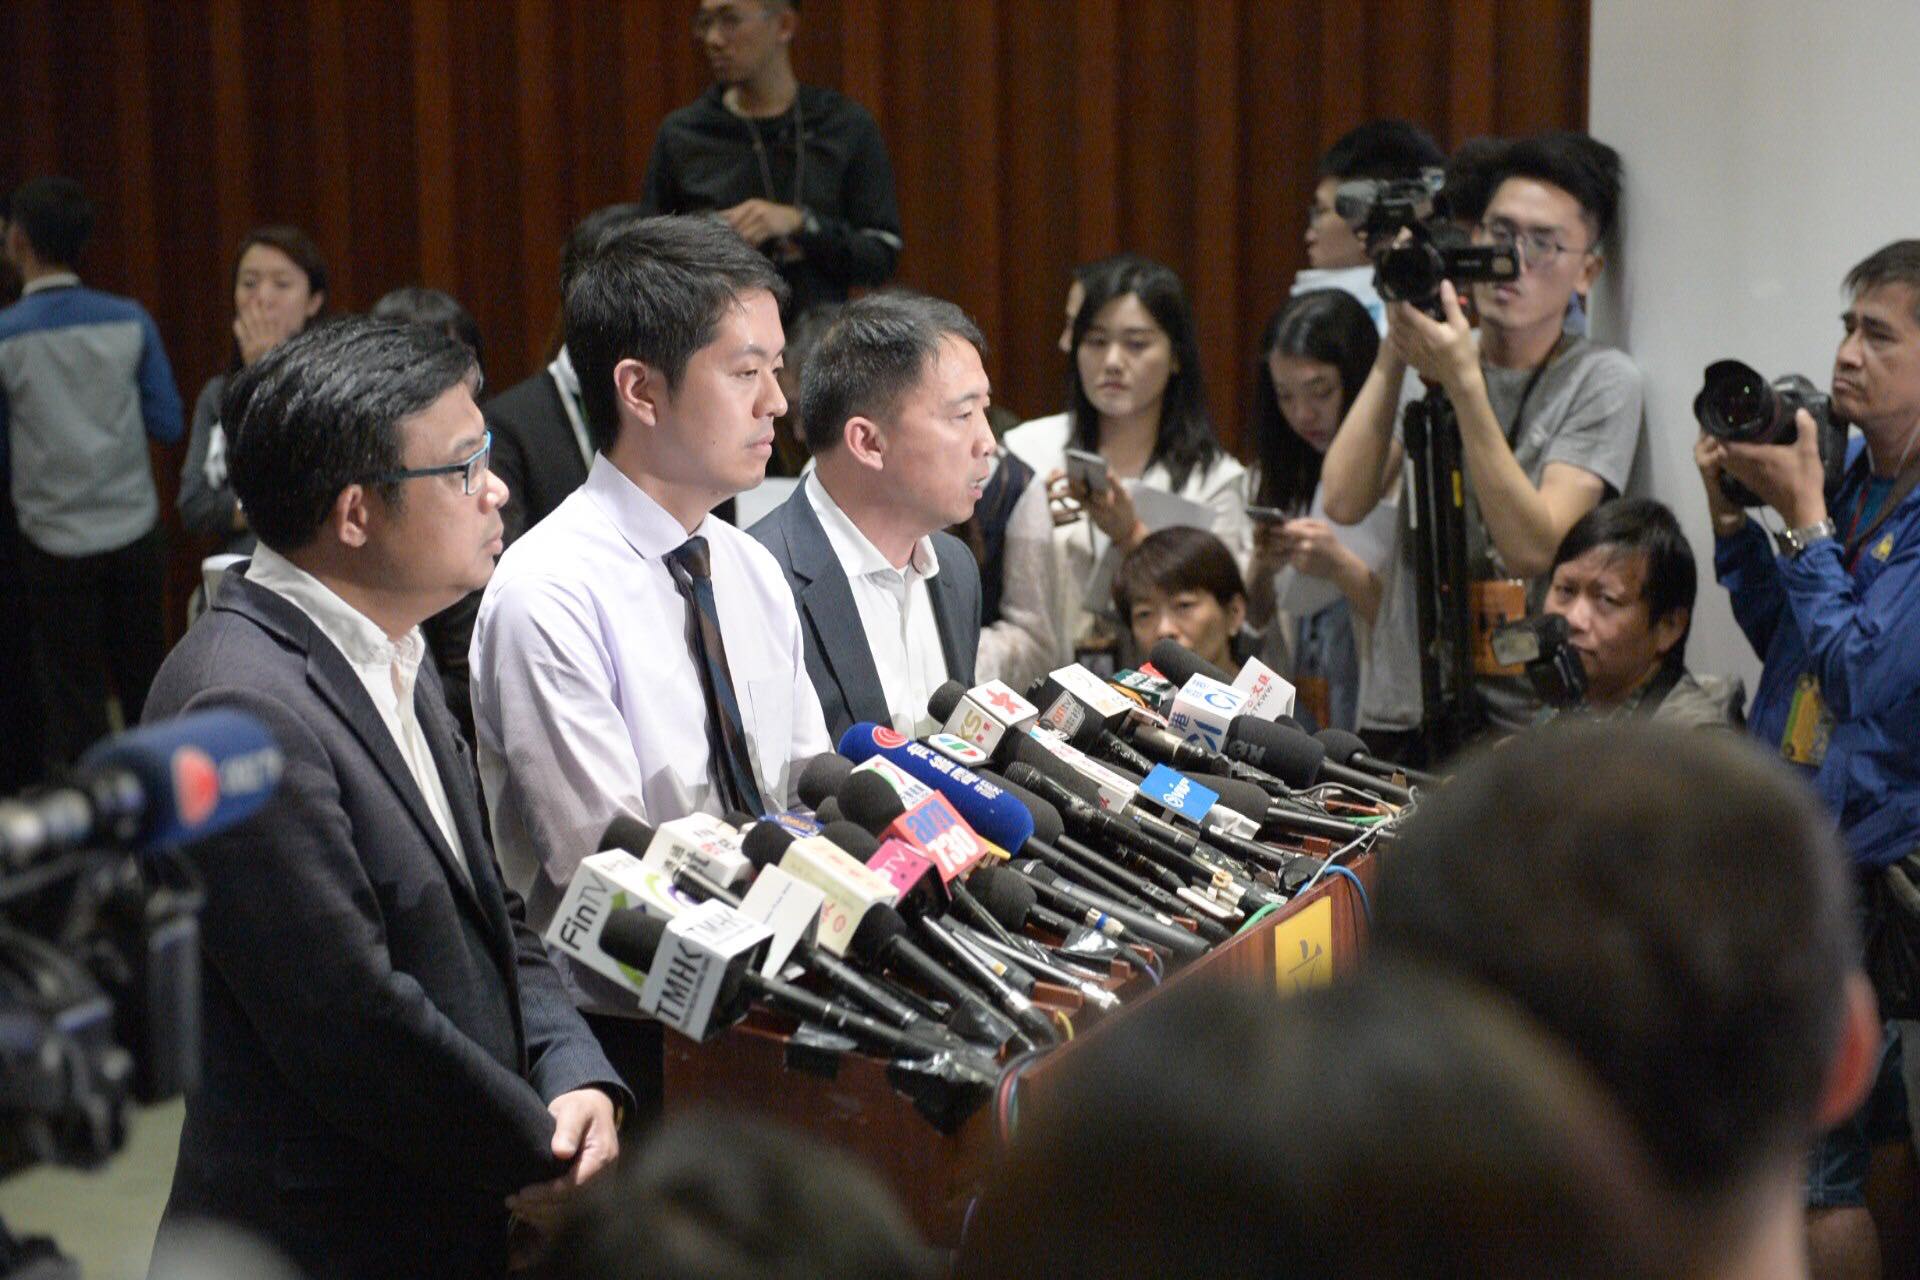 Ted Hui (second from left) speaks to the media following the phone snatching incident. Photo via Facebook.